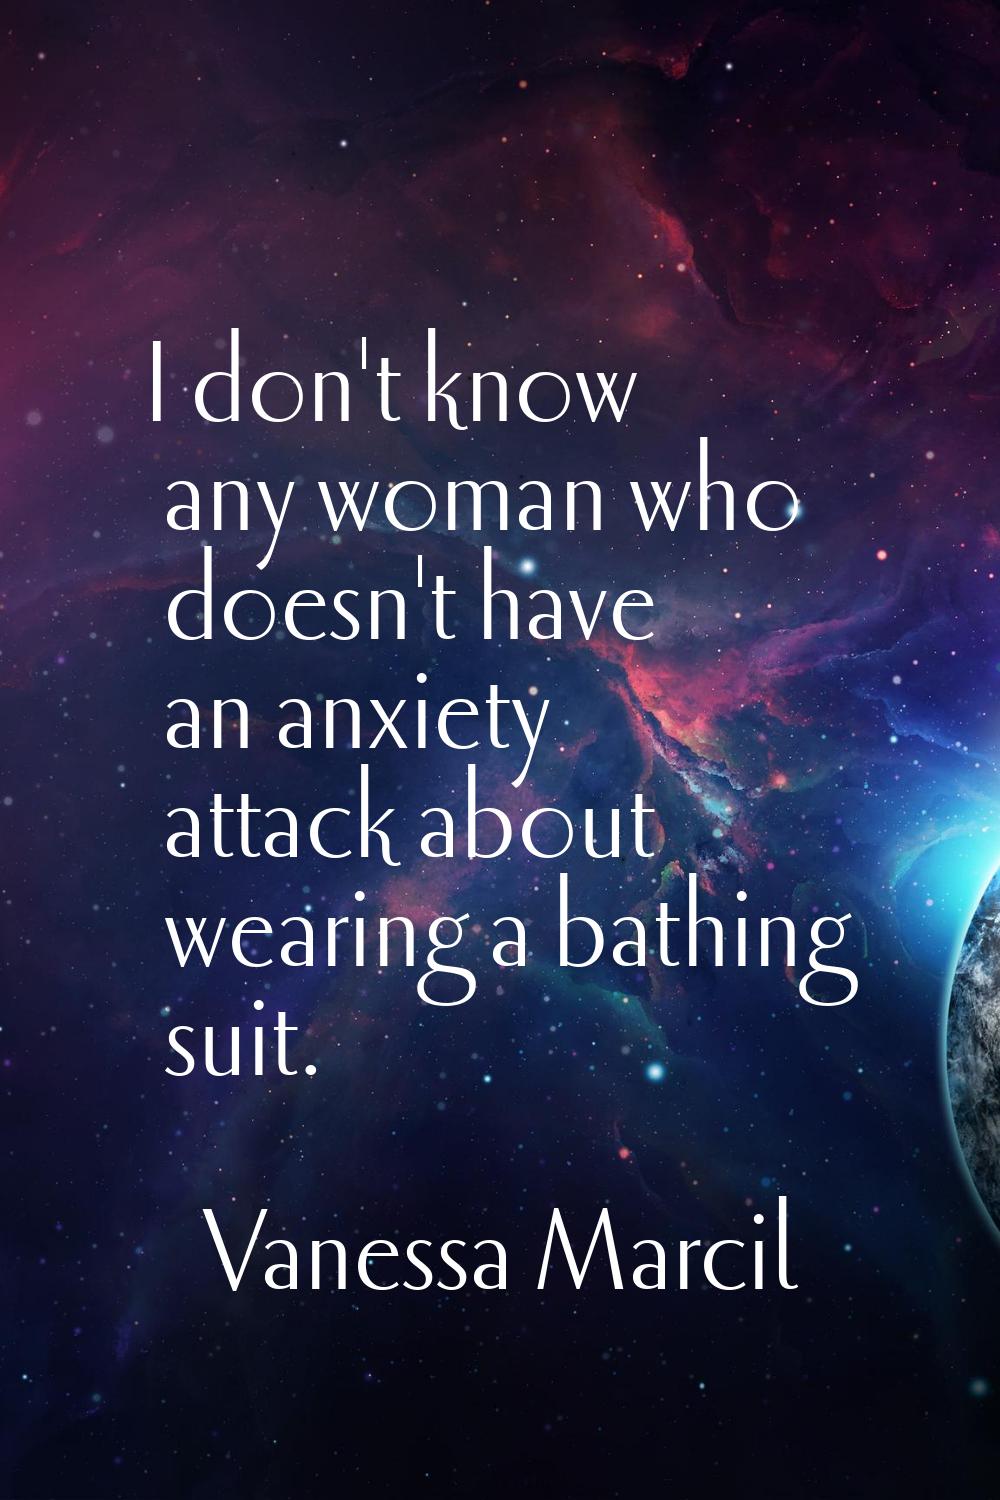 I don't know any woman who doesn't have an anxiety attack about wearing a bathing suit.